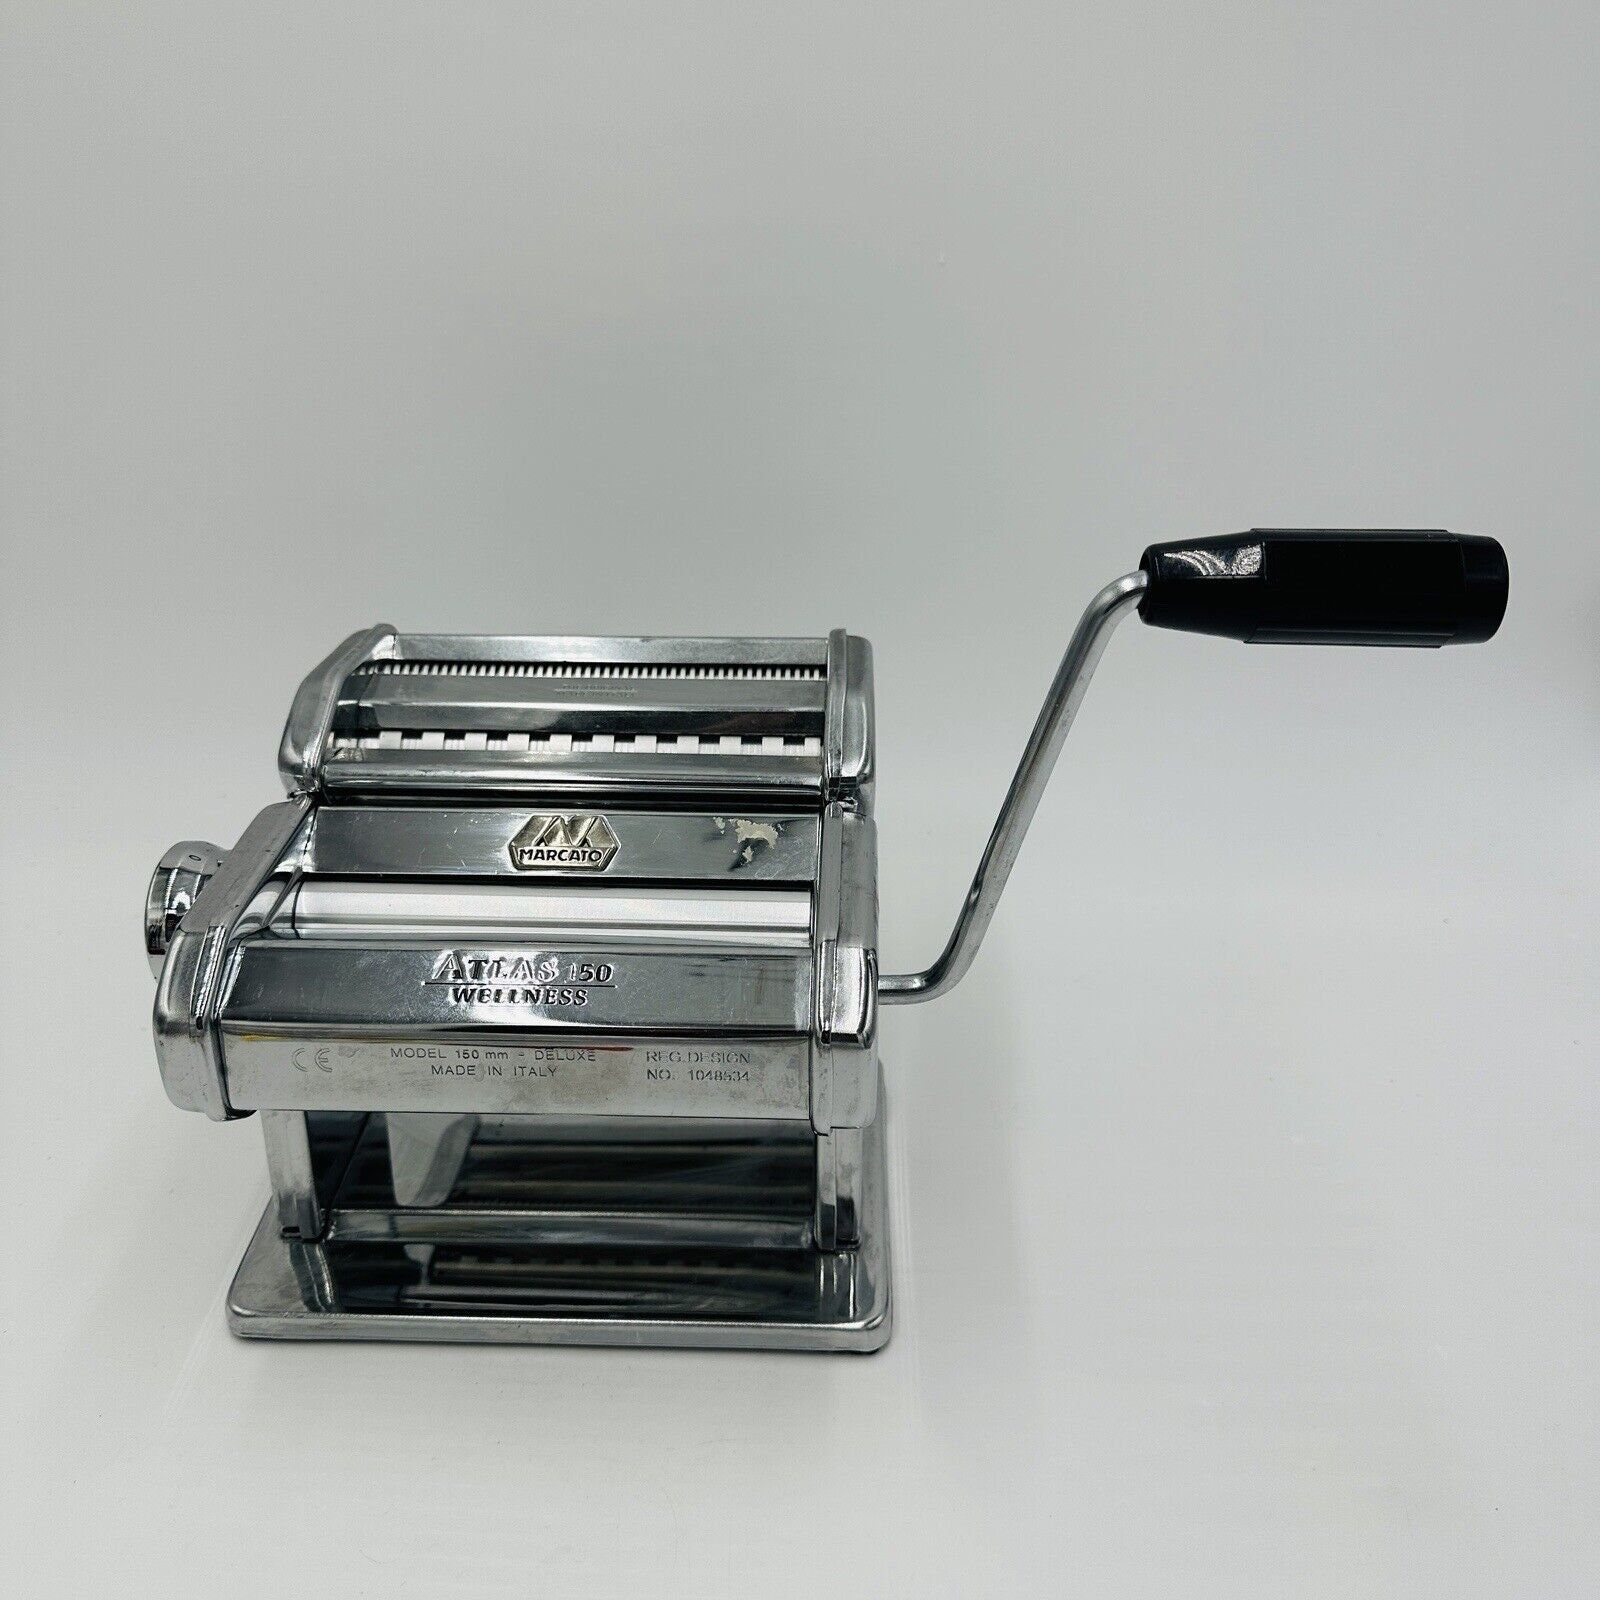 Marcato Atlas 150 Stainless Steel Pasta Machine, Made in Italy